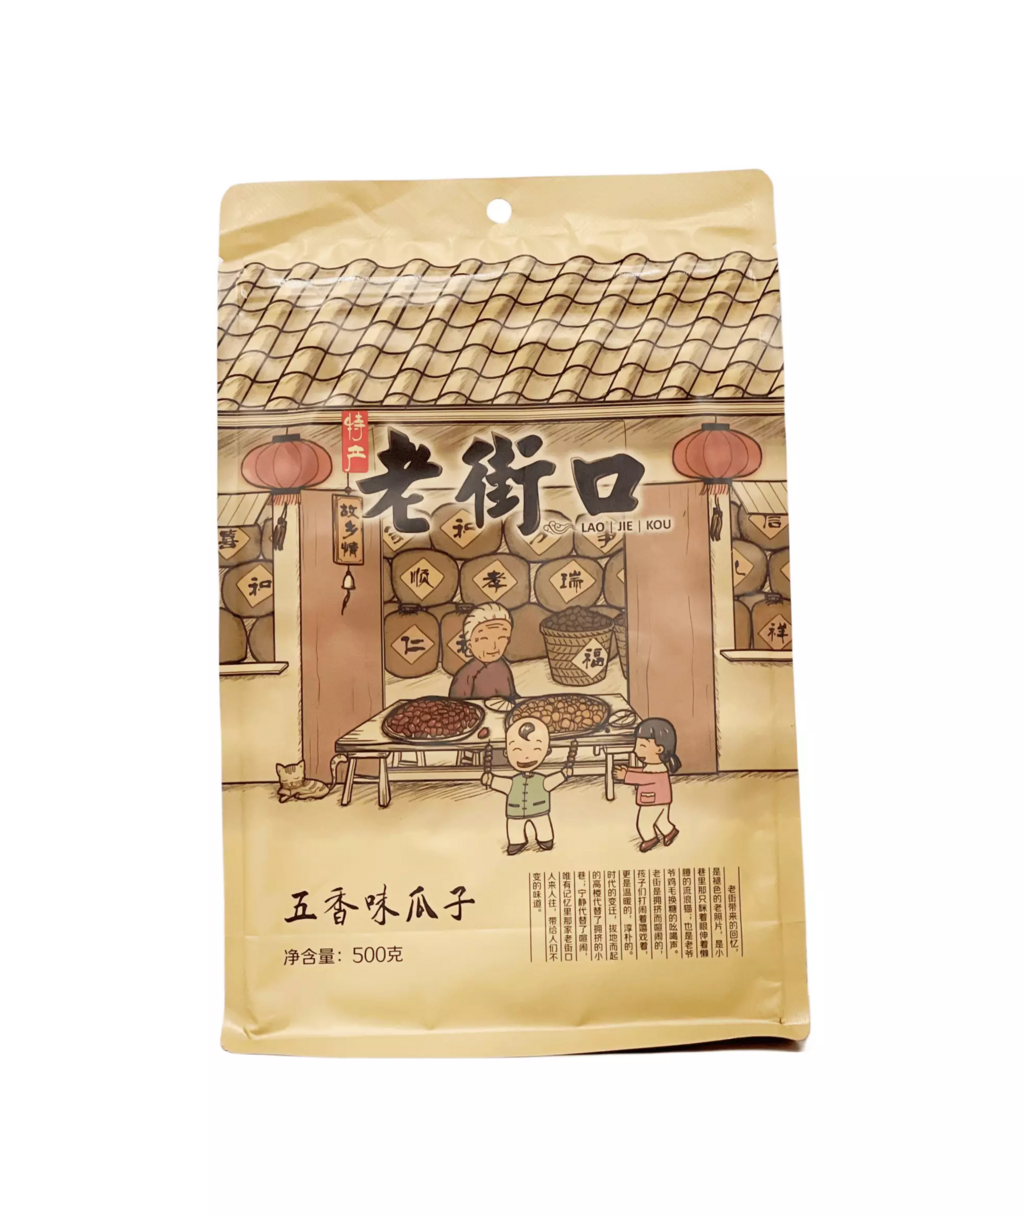 Sunflower Seeds With Five Spices Flavor 500g Lao Jie Kou China